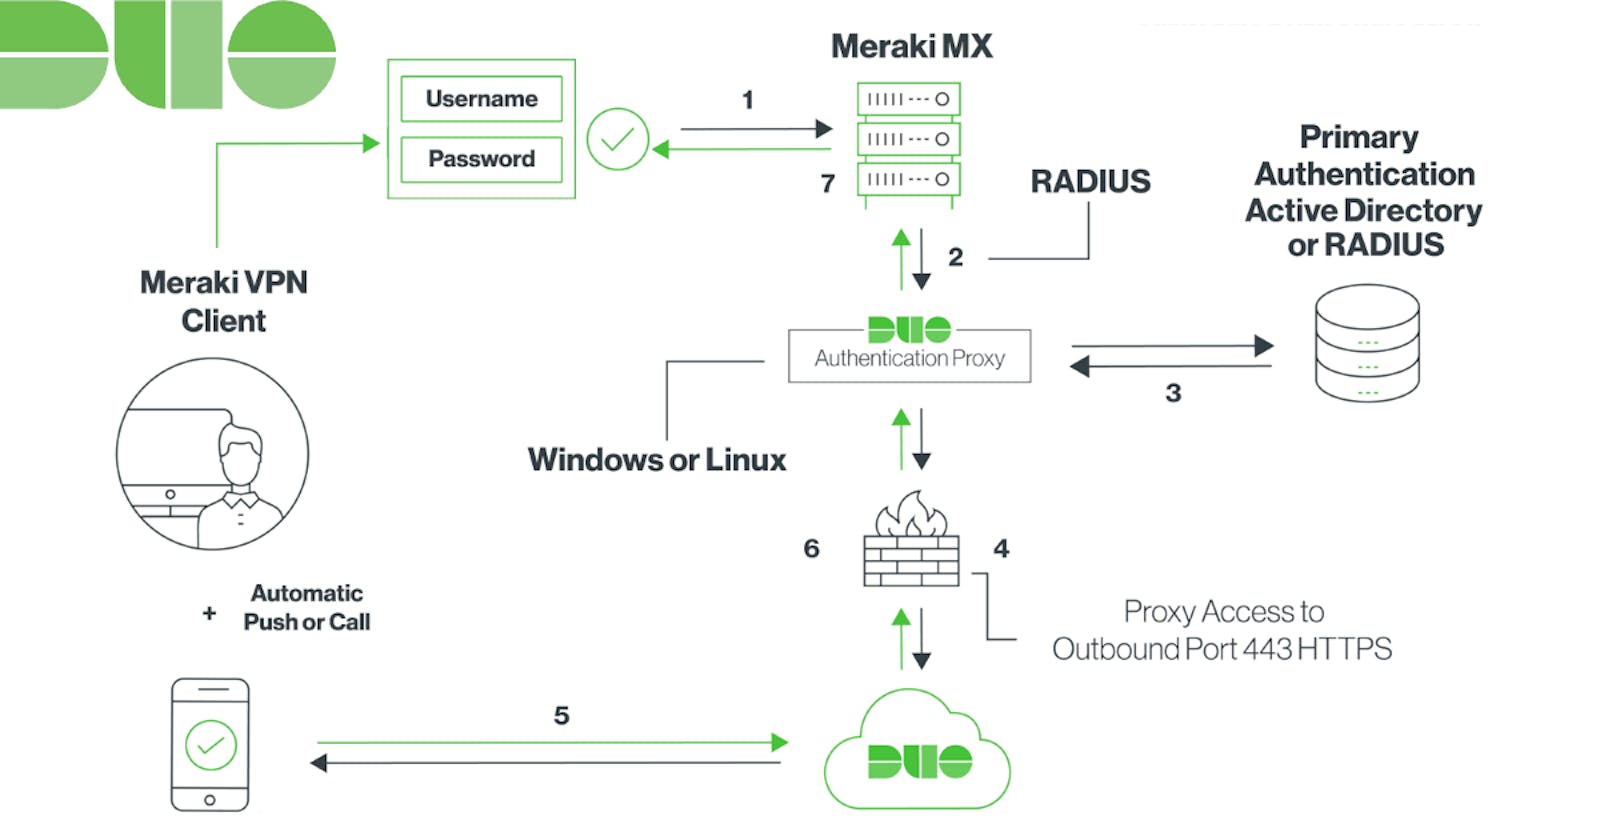 DUO Authentication Proxy: Securing our Meraki VPN with 2FA